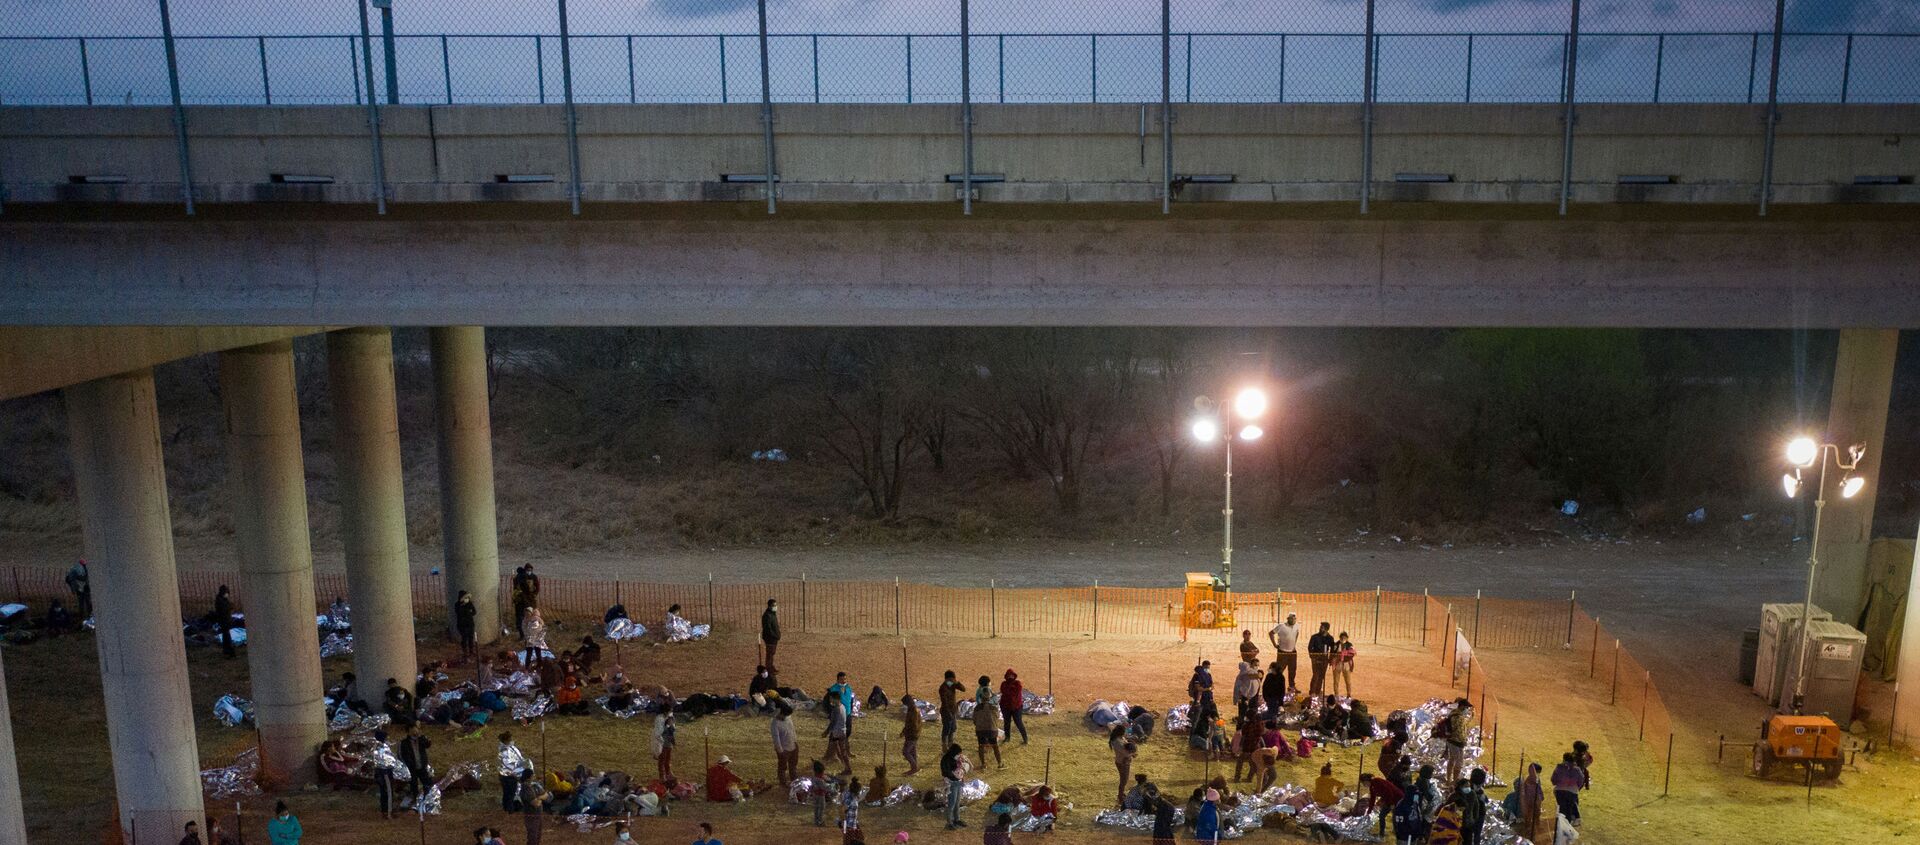 Asylum seeking migrant families and unaccompanied minors from Central America take refuge in a makeshift U.S. Customs and Border Protection processing center under the Anzalduas International Bridge after crossing the Rio Grande river into the United States from Mexico in Granjeno, Texas, U.S., March 12, 2021. REUTERS/Adrees Latif/File Photo - Sputnik International, 1920, 22.03.2021